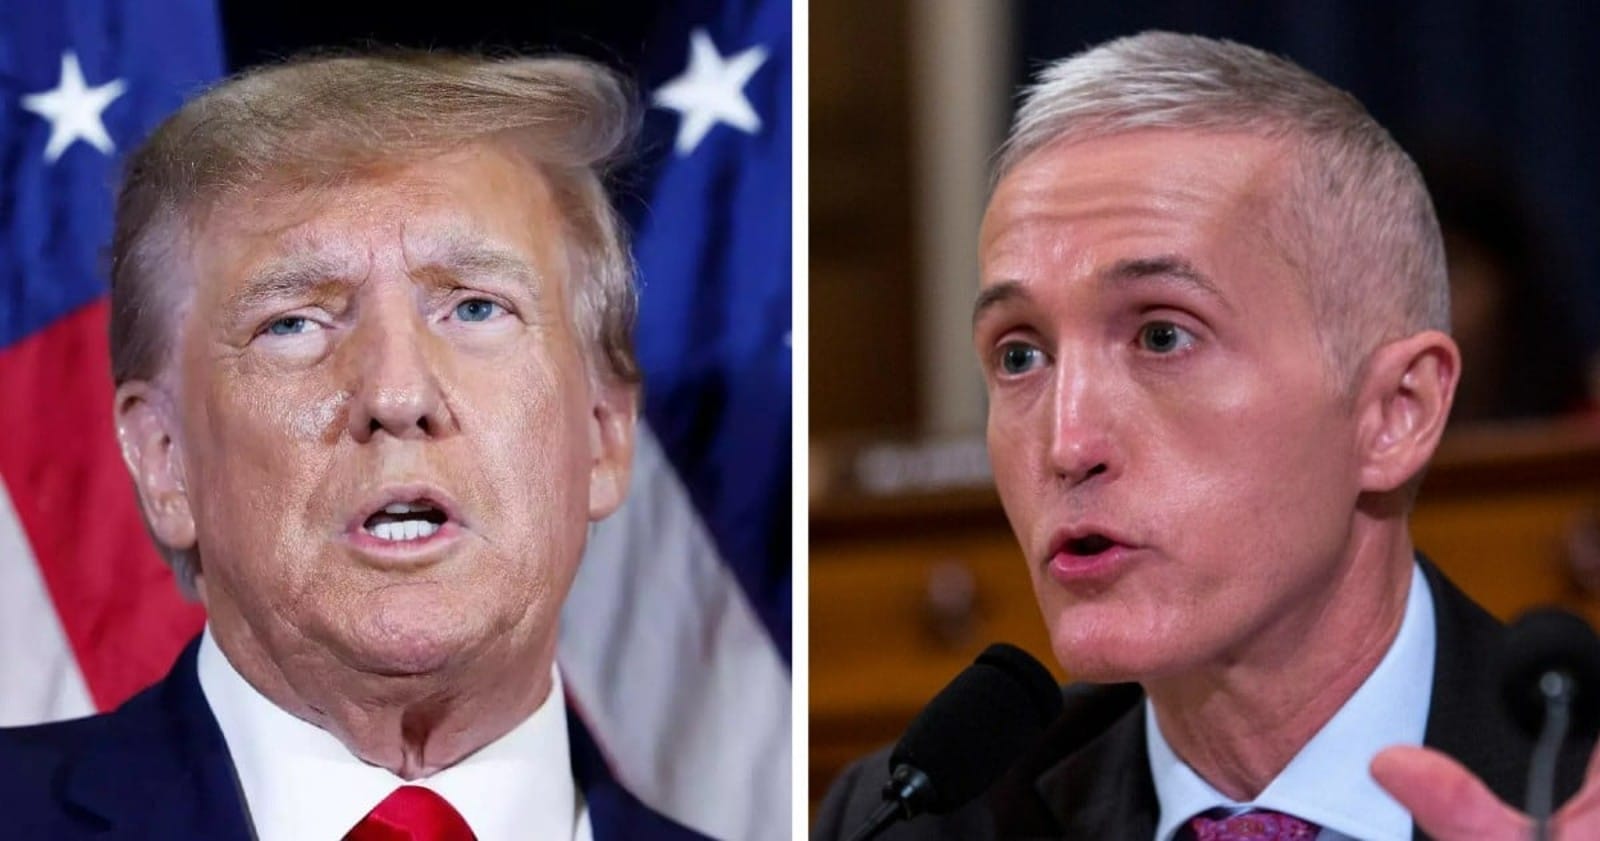 Trey Gowdy Infuriates Republicans with Disturbing Comments on Fox About Trump - 'That Is The Thing With President Trump,' He Says About DOJ Case Comments